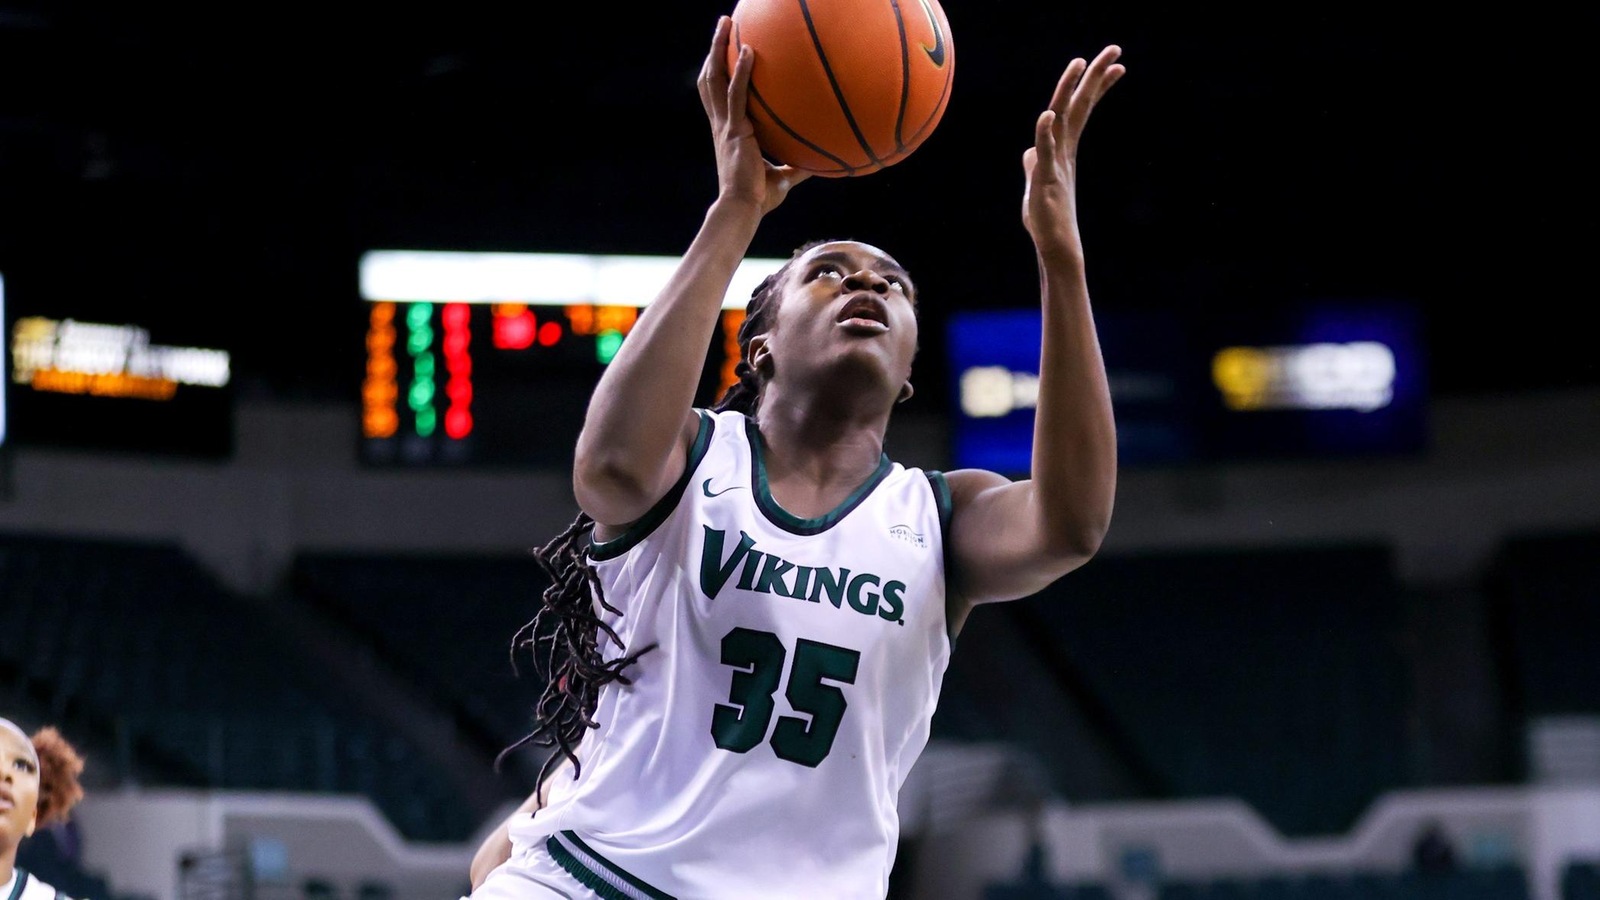 Cleveland State Women’s Basketball Opens #HLWBB Play With 77-54 Win Over Oakland